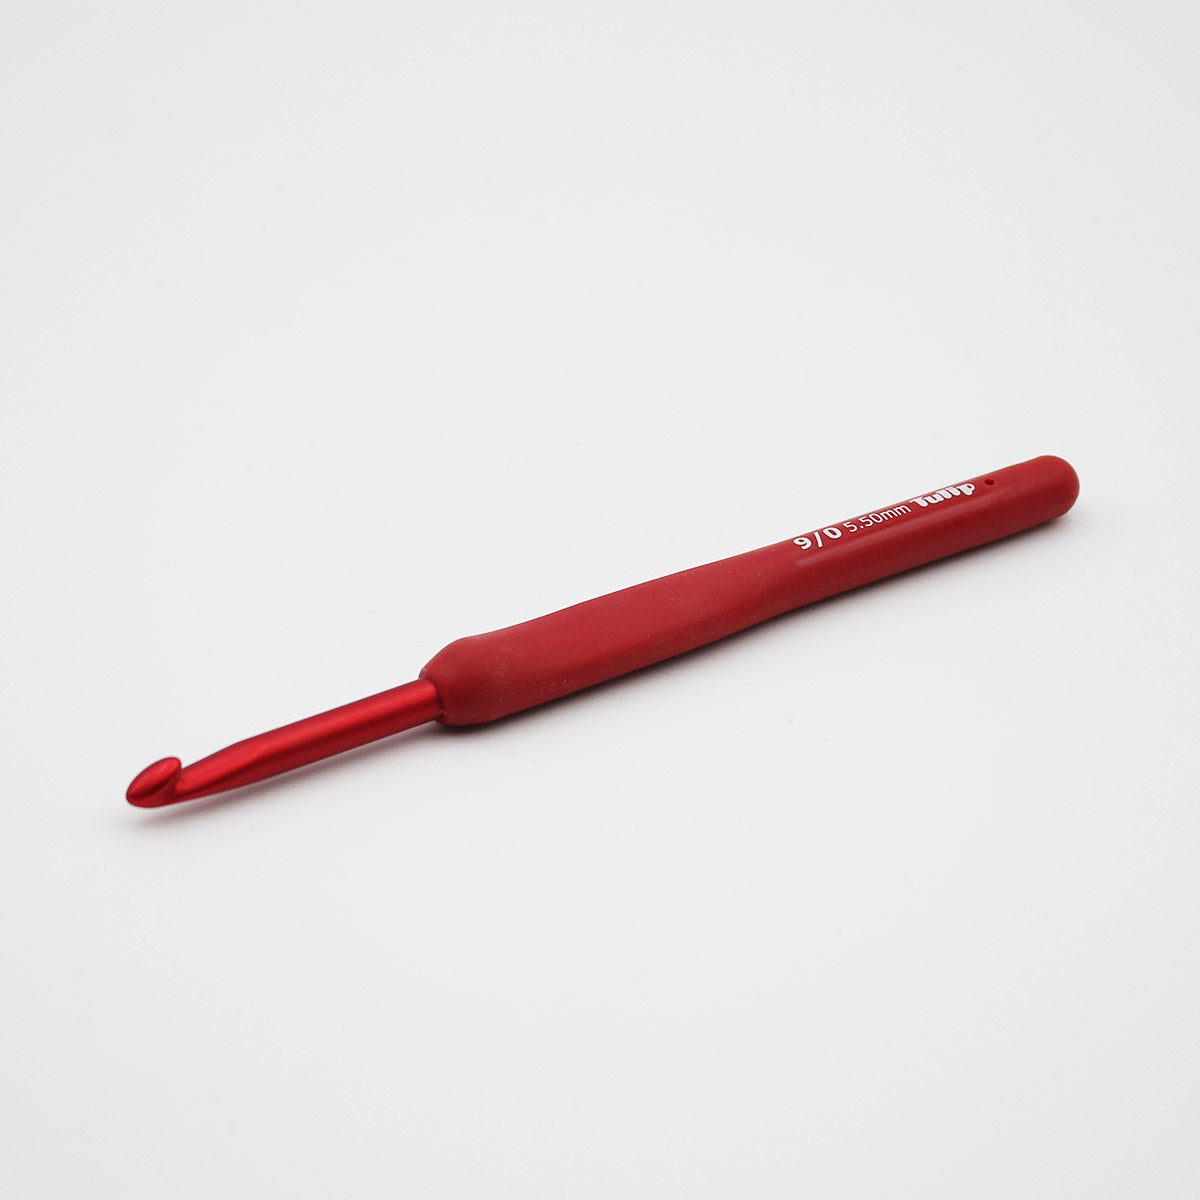 ETIMO Red crochet hook set Tulip with soft handle 1.80 - 5.00 mm TED001E